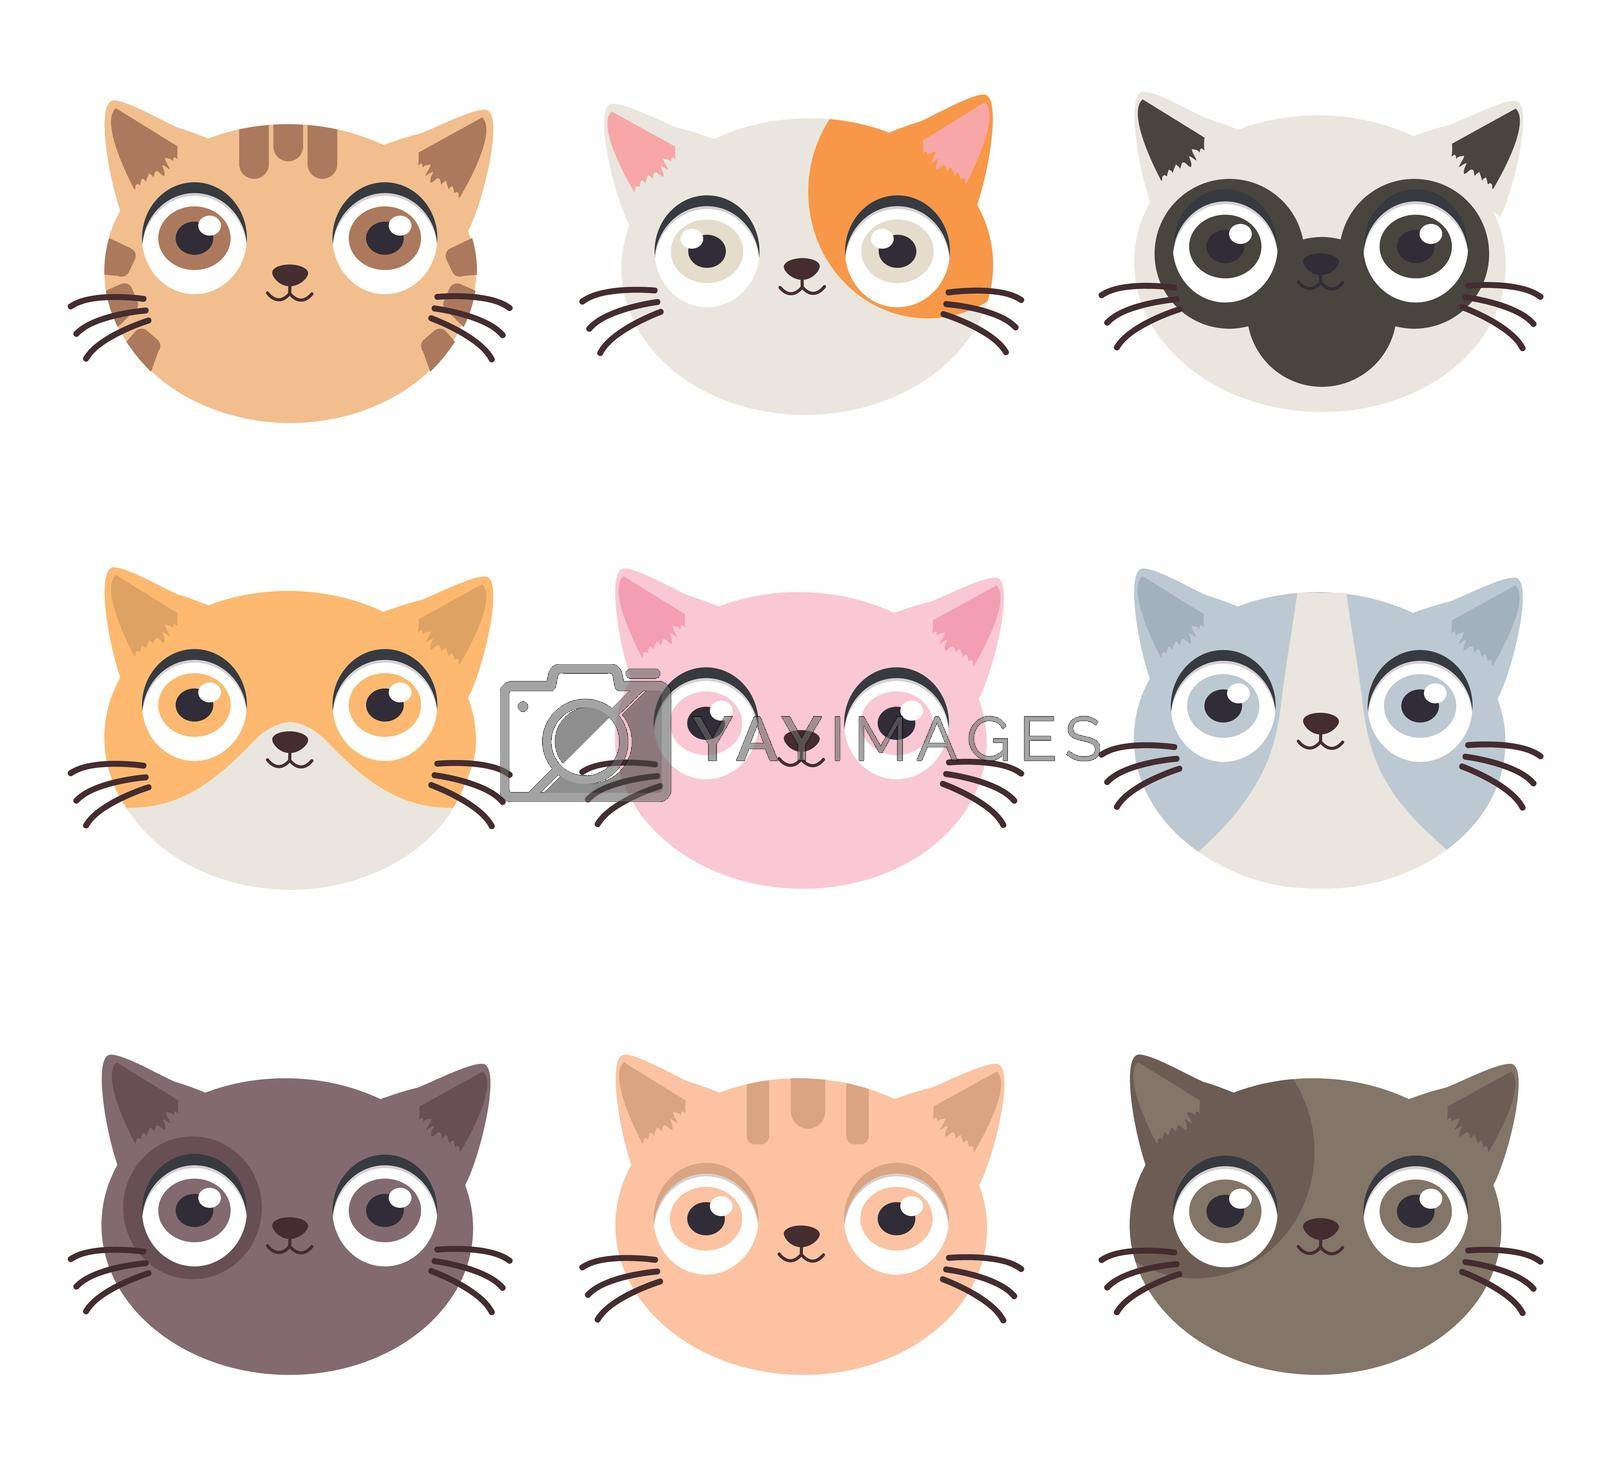 Royalty free image of Set of cute cats head vector by focus_bell